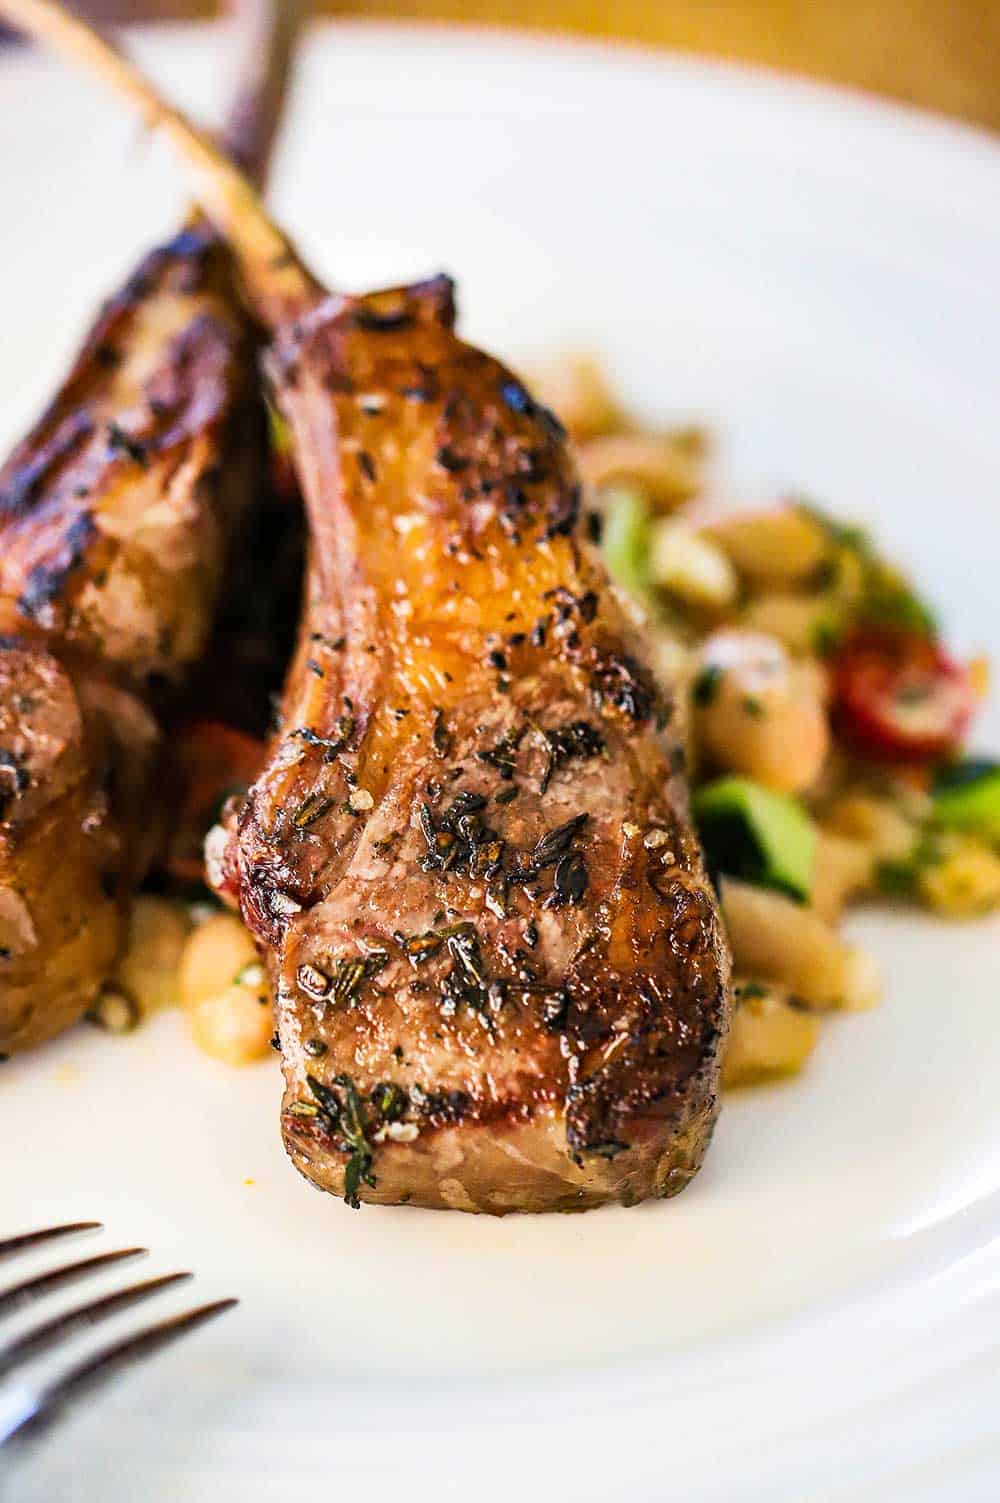 A close-up view of a marinated grilled lamb chop sitting on a Greek salad on a white dinner plate.